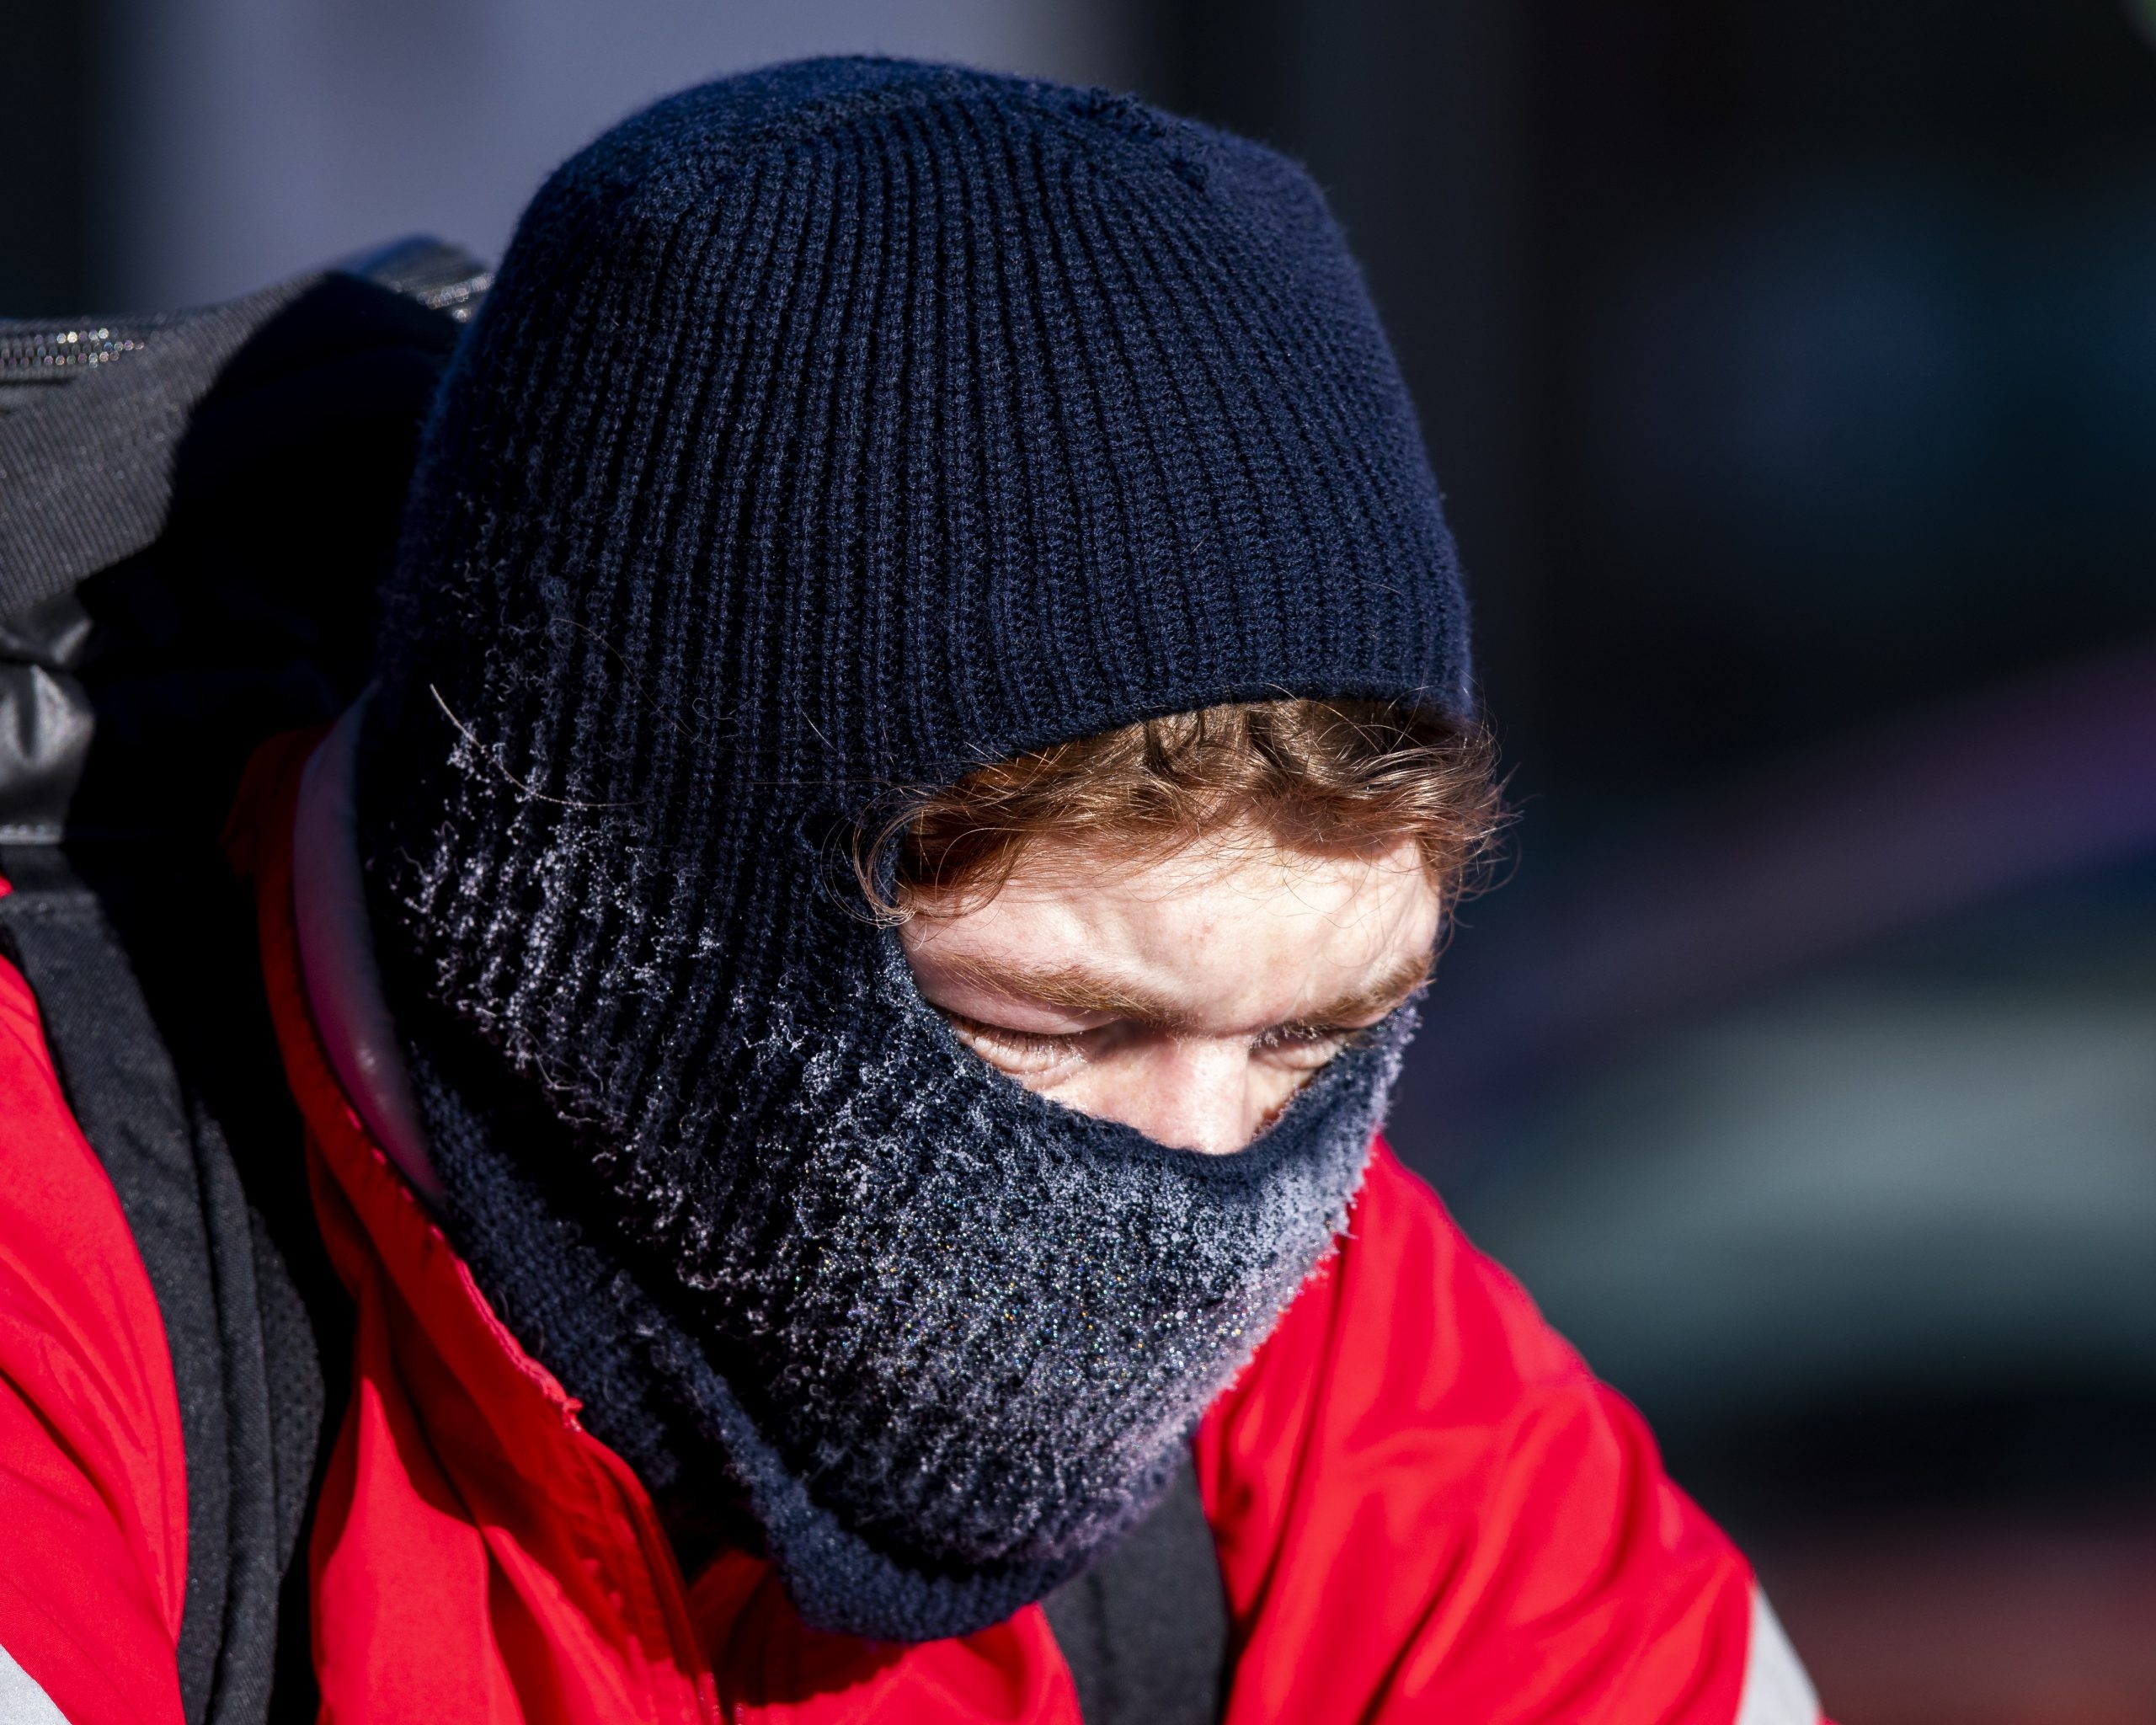 OTTAWA — A cyclist braves the extreme cold along Elgin Street on Tuesday, Jan. 11, 2022